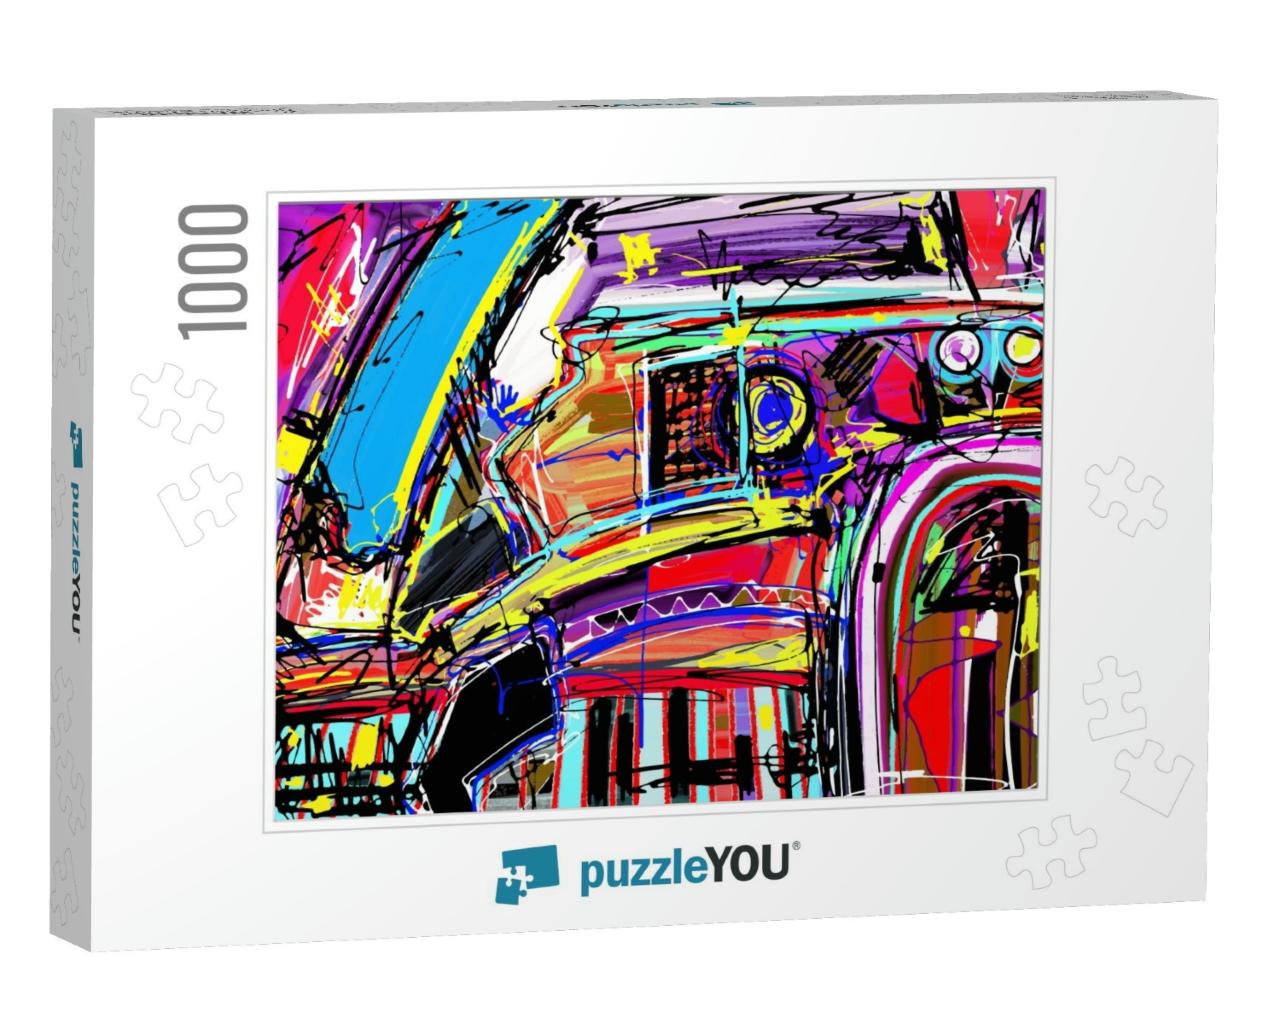 Original Digital Painting of Abstraction Composition, You... Jigsaw Puzzle with 1000 pieces